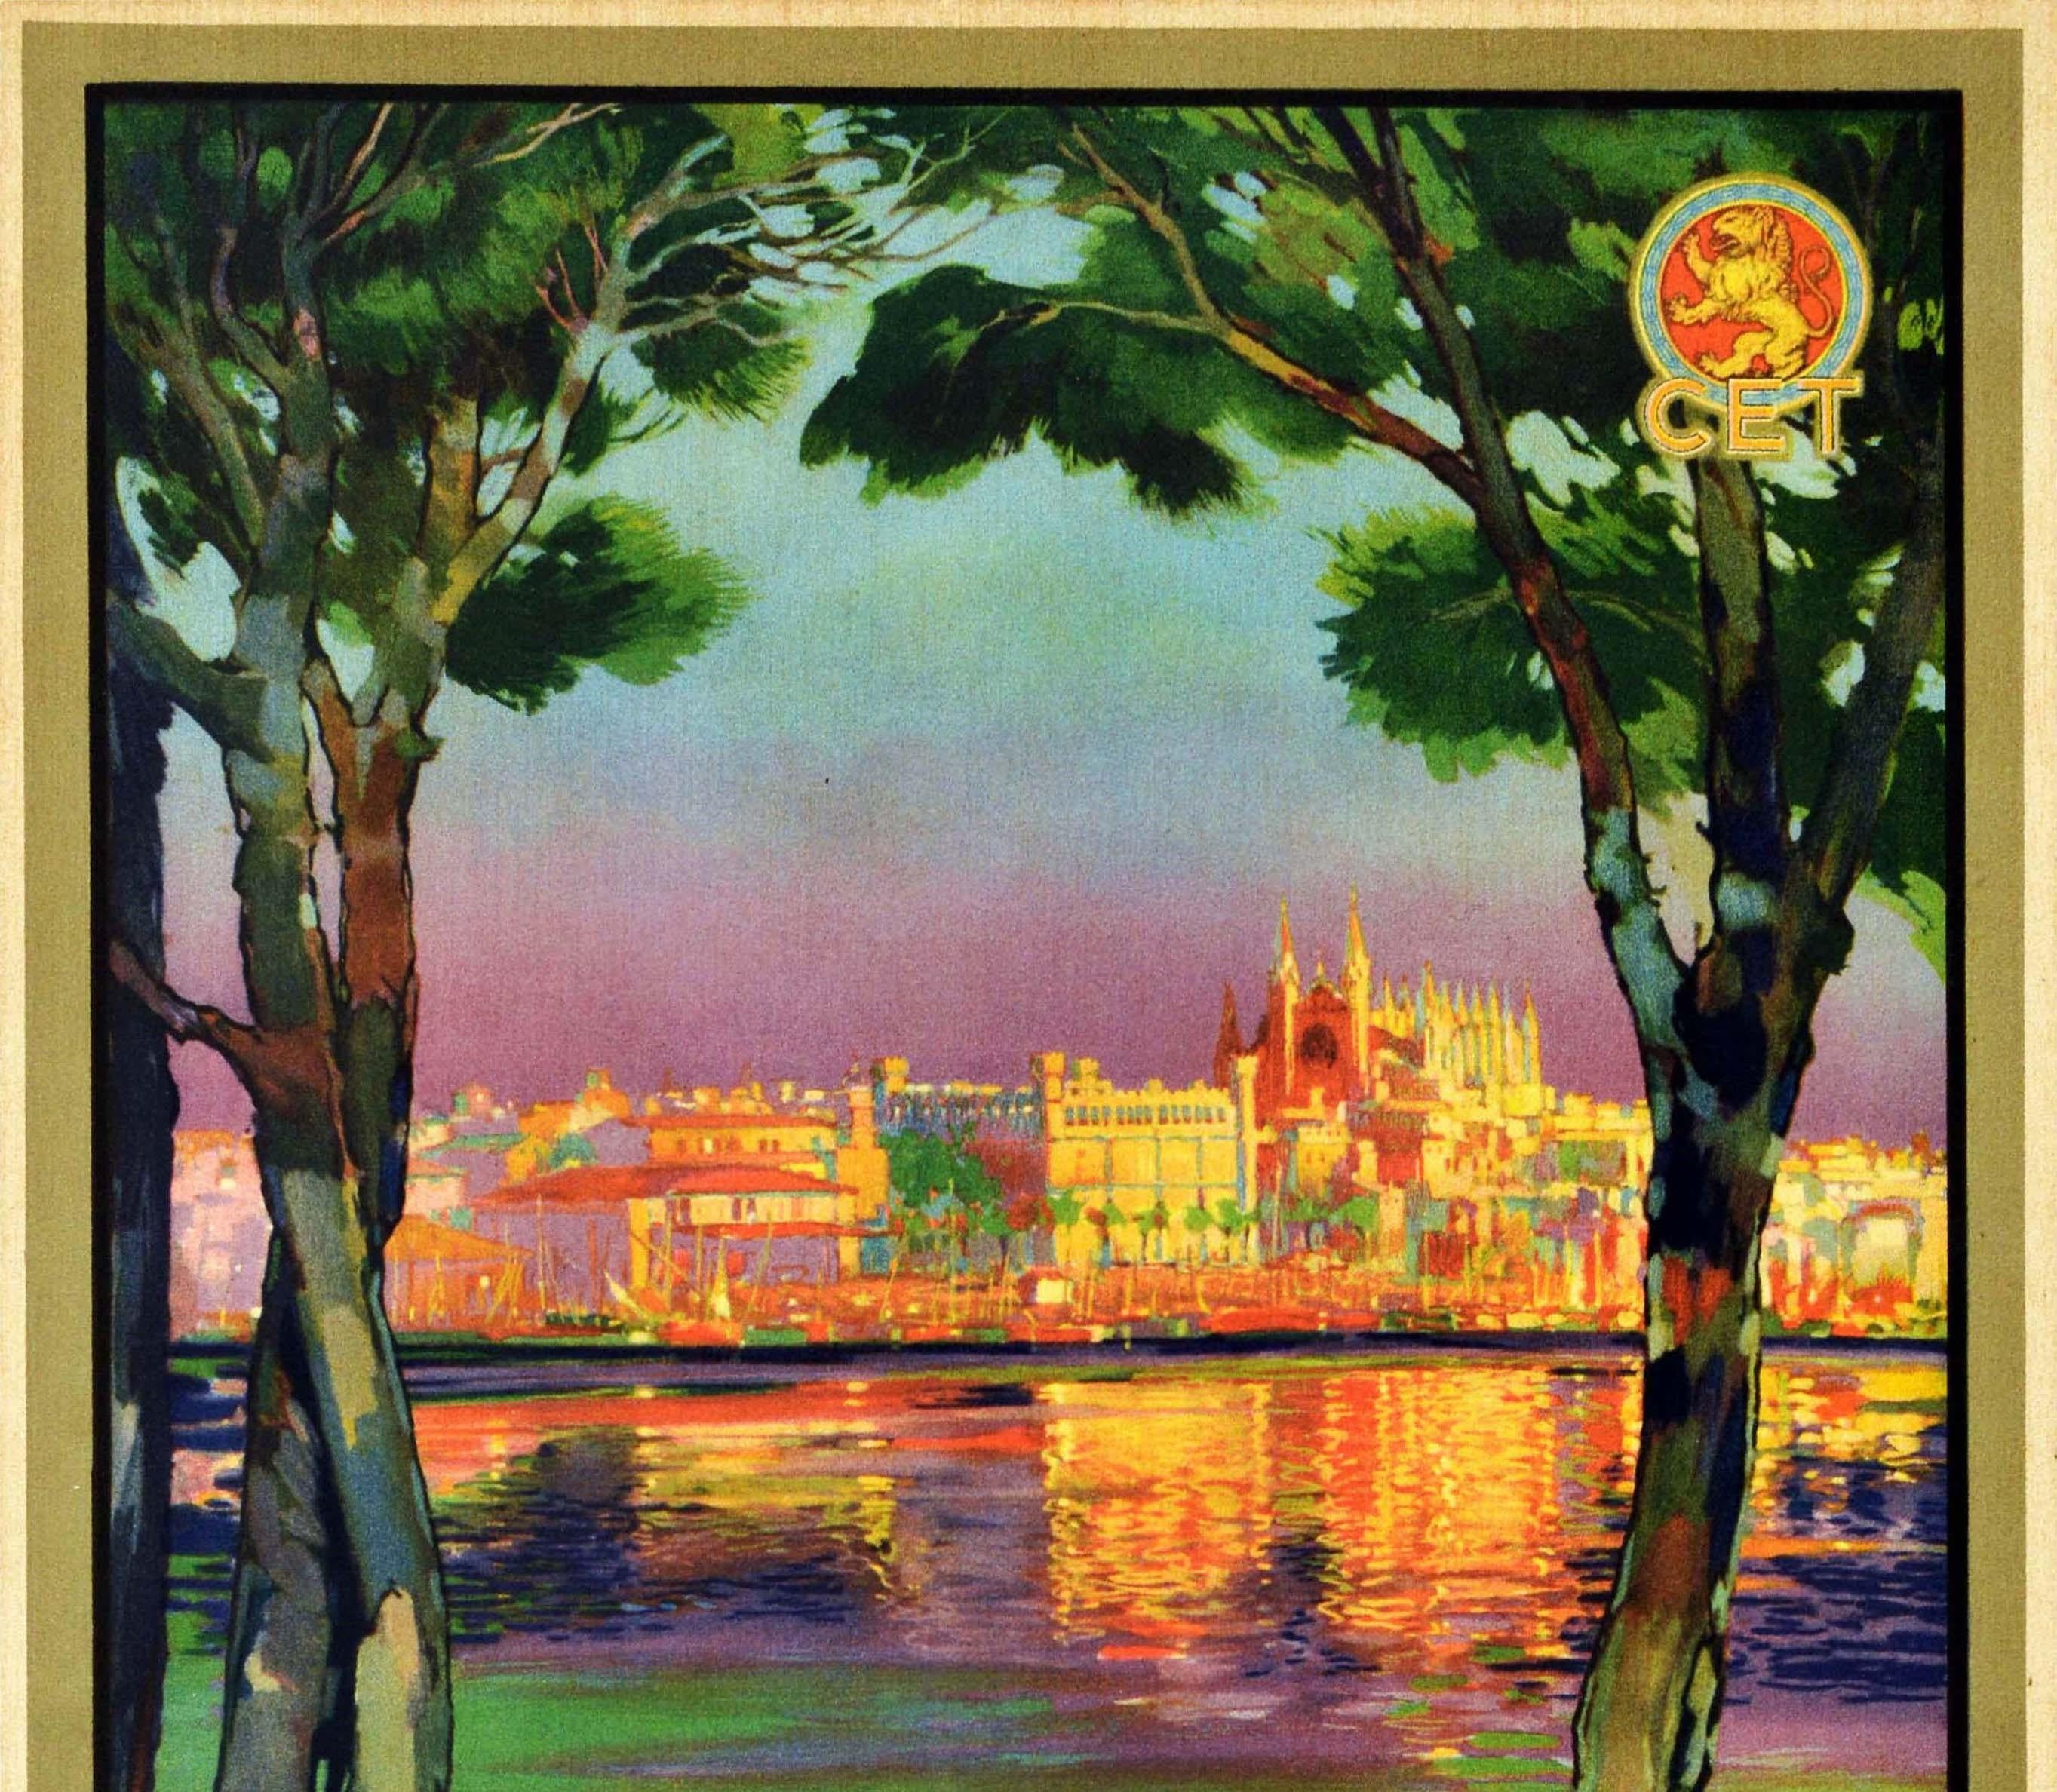 Original vintage travel poster - Visitad Palma de Mallorca la Isla Dorada / Visit Palma on Majorca the Golden Island - featuring a scenic view framed by trees looking over the Bay of Palma on the Mediterranean Sea to the capital city of the Balearic